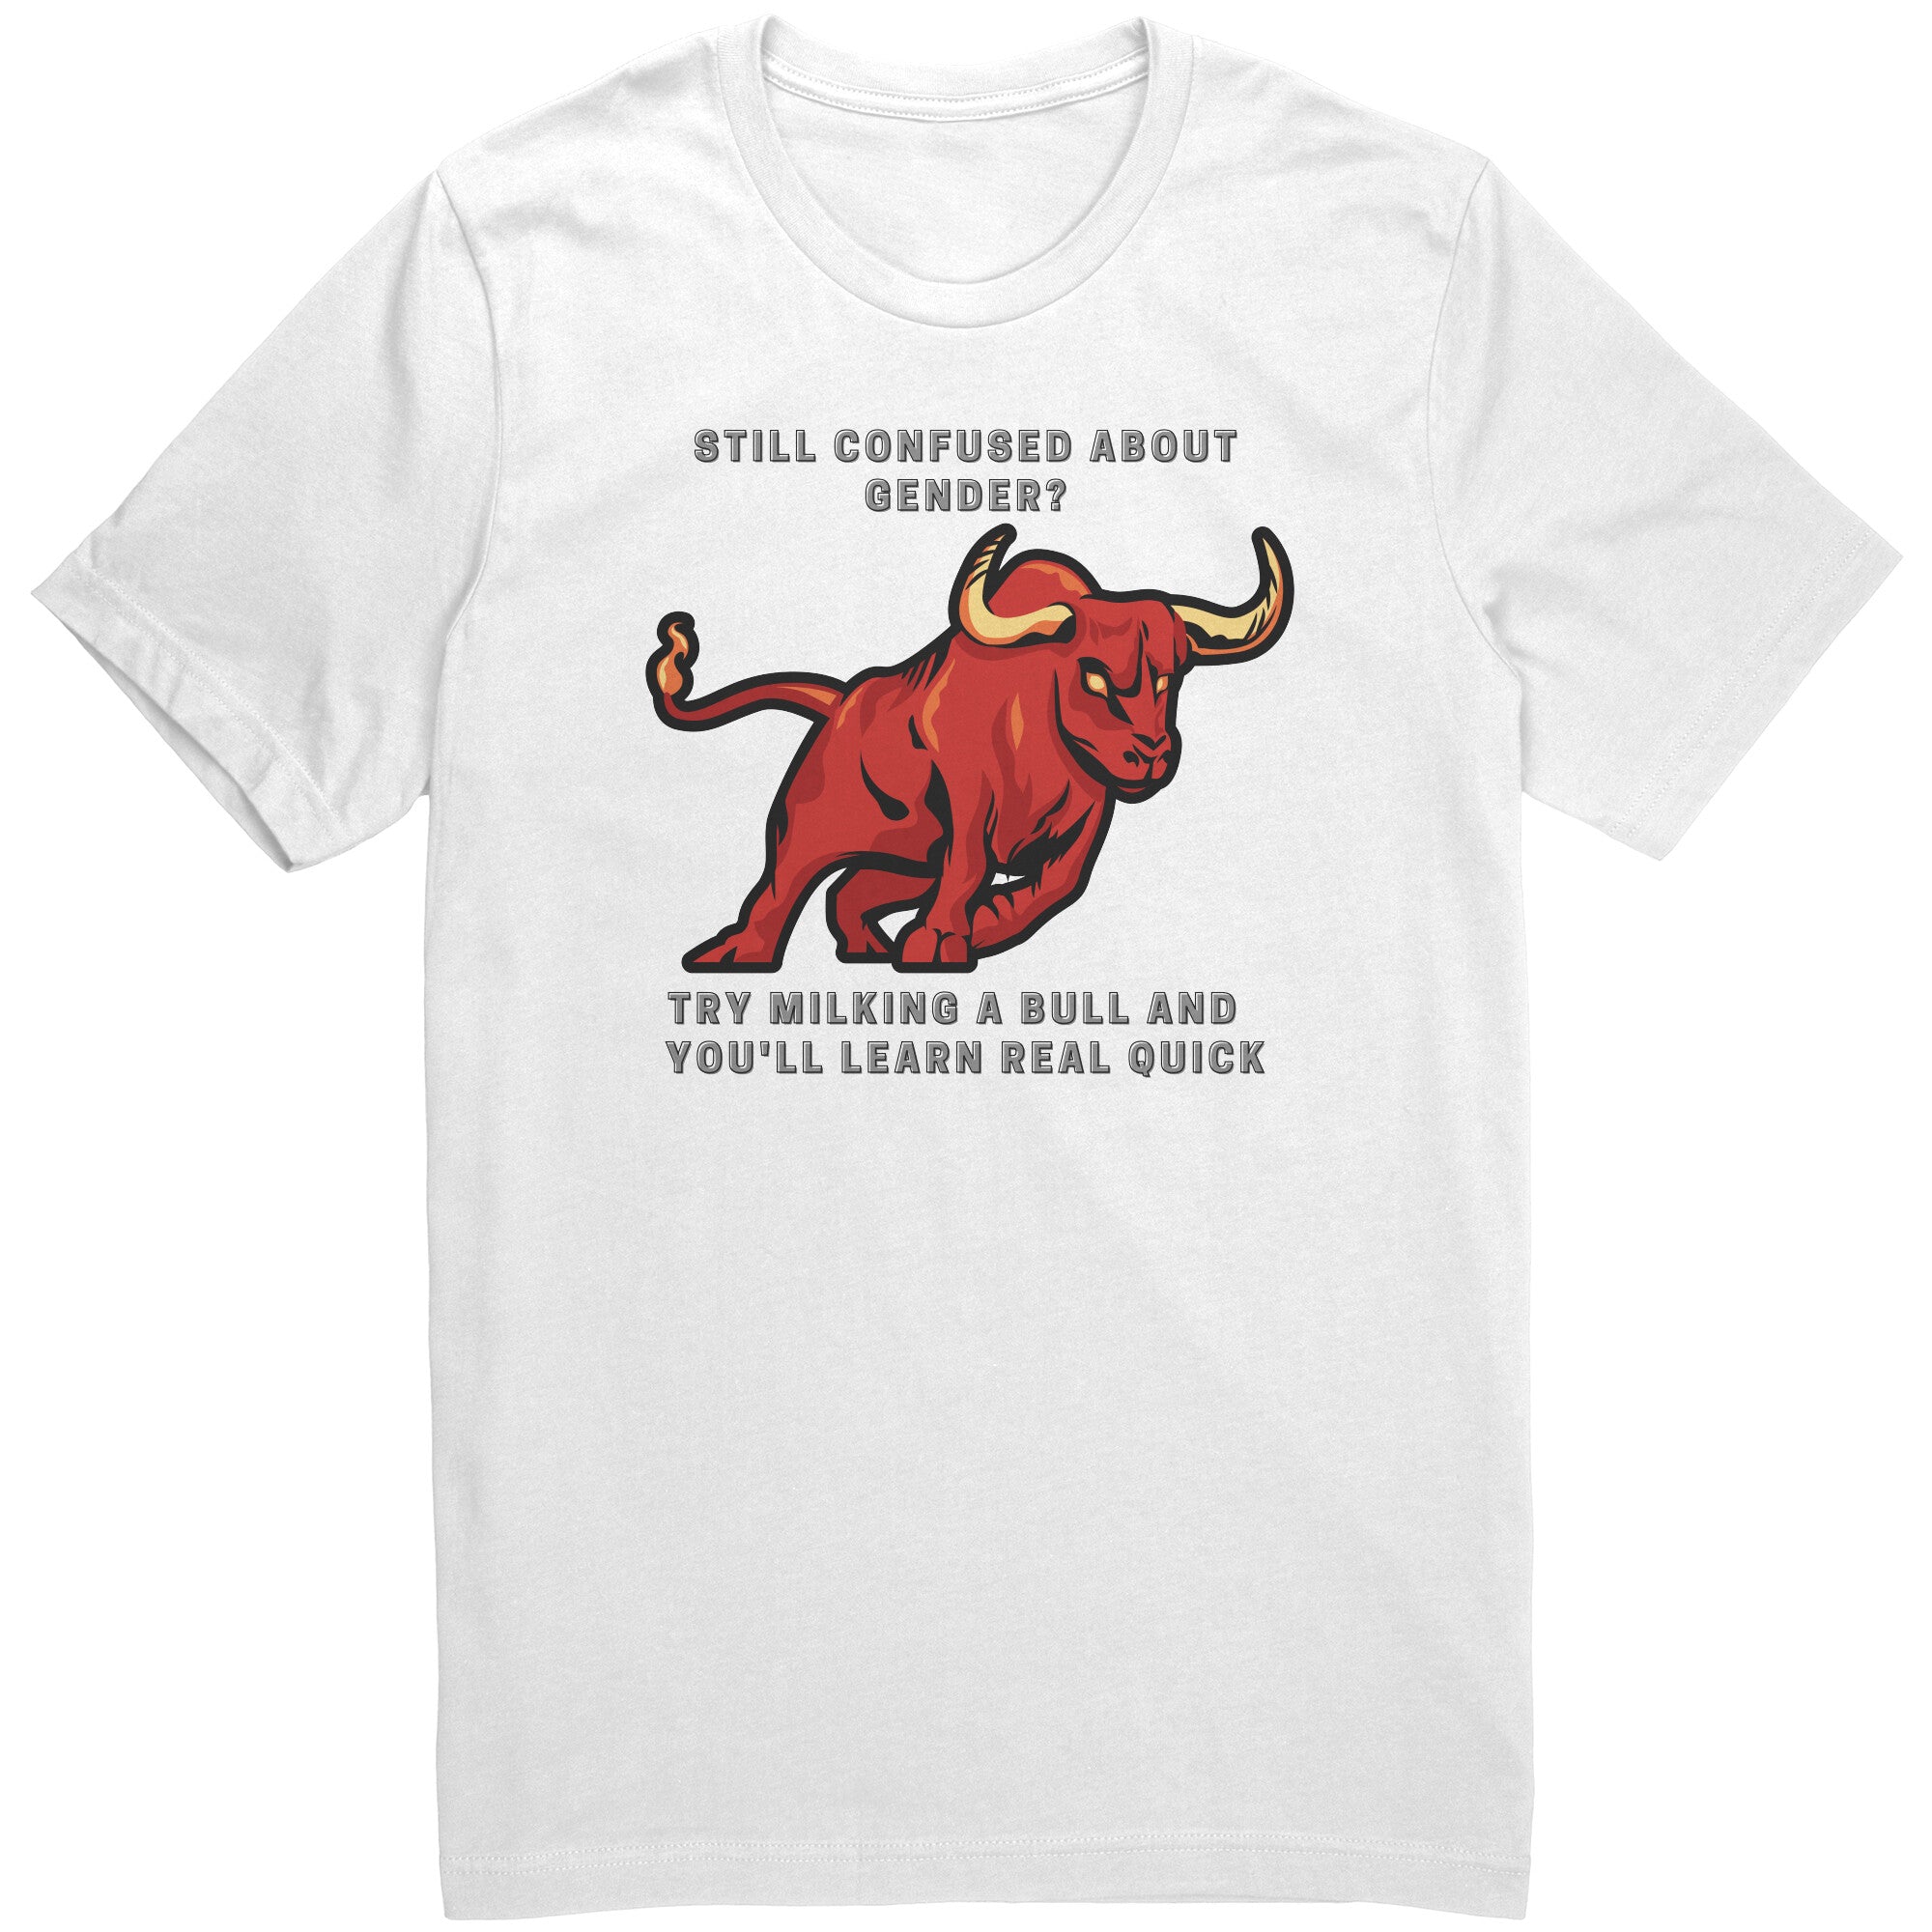 Confused About Gender Funny Bull T-Shirt Unisex Politics Tee Sarcastic TShirt white